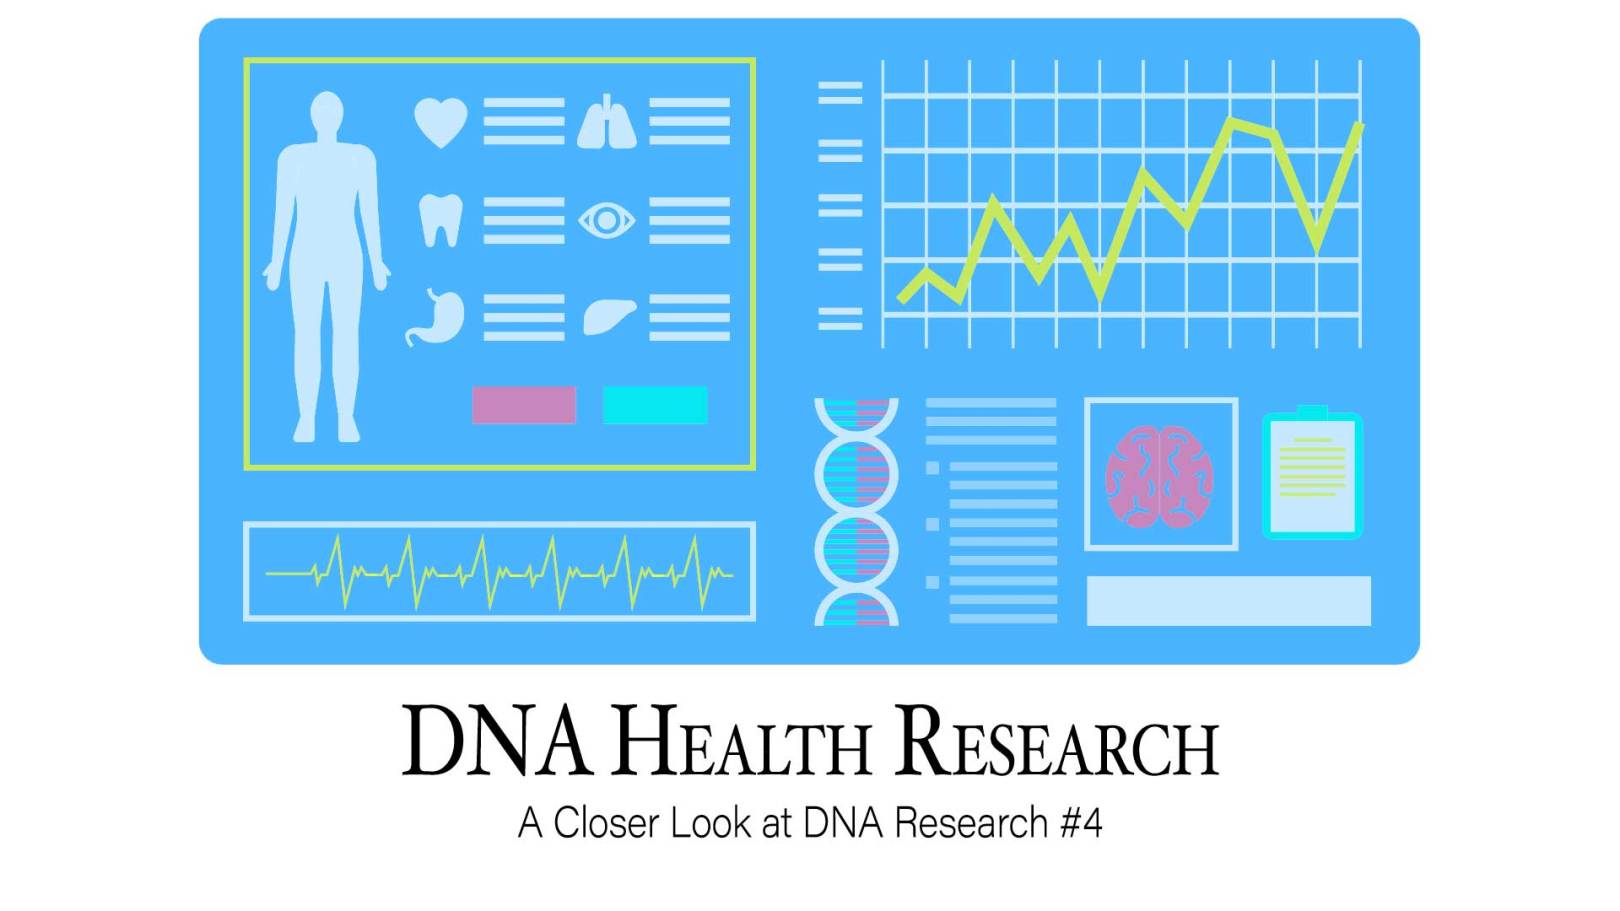 DNA Health Research: A Closer Look at DNA Research #4